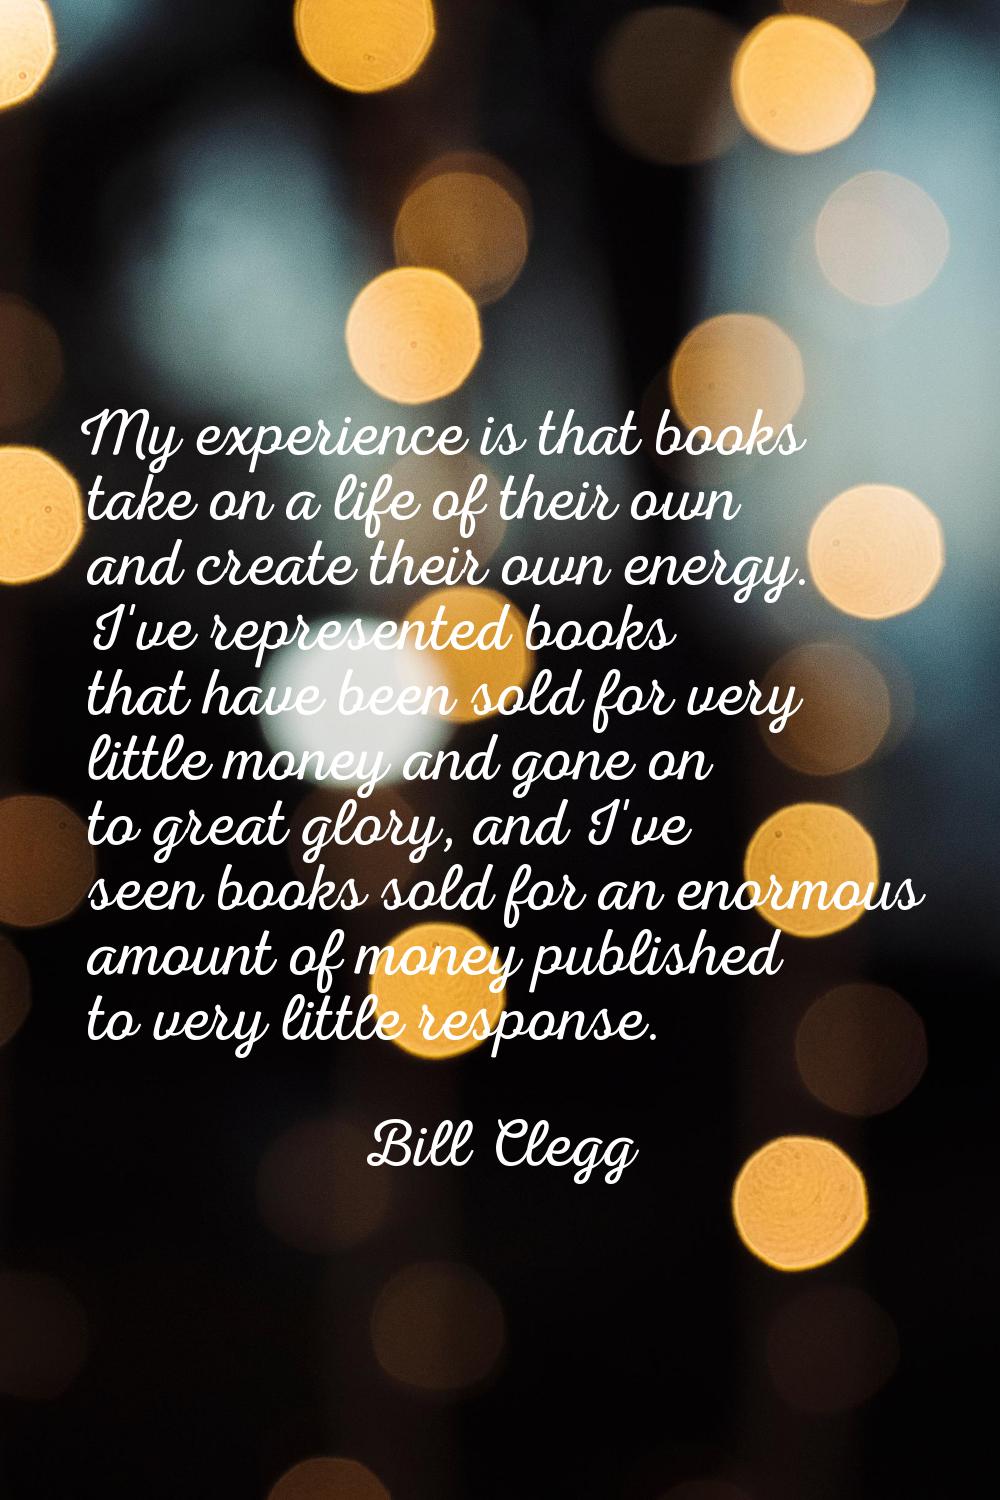 My experience is that books take on a life of their own and create their own energy. I've represent